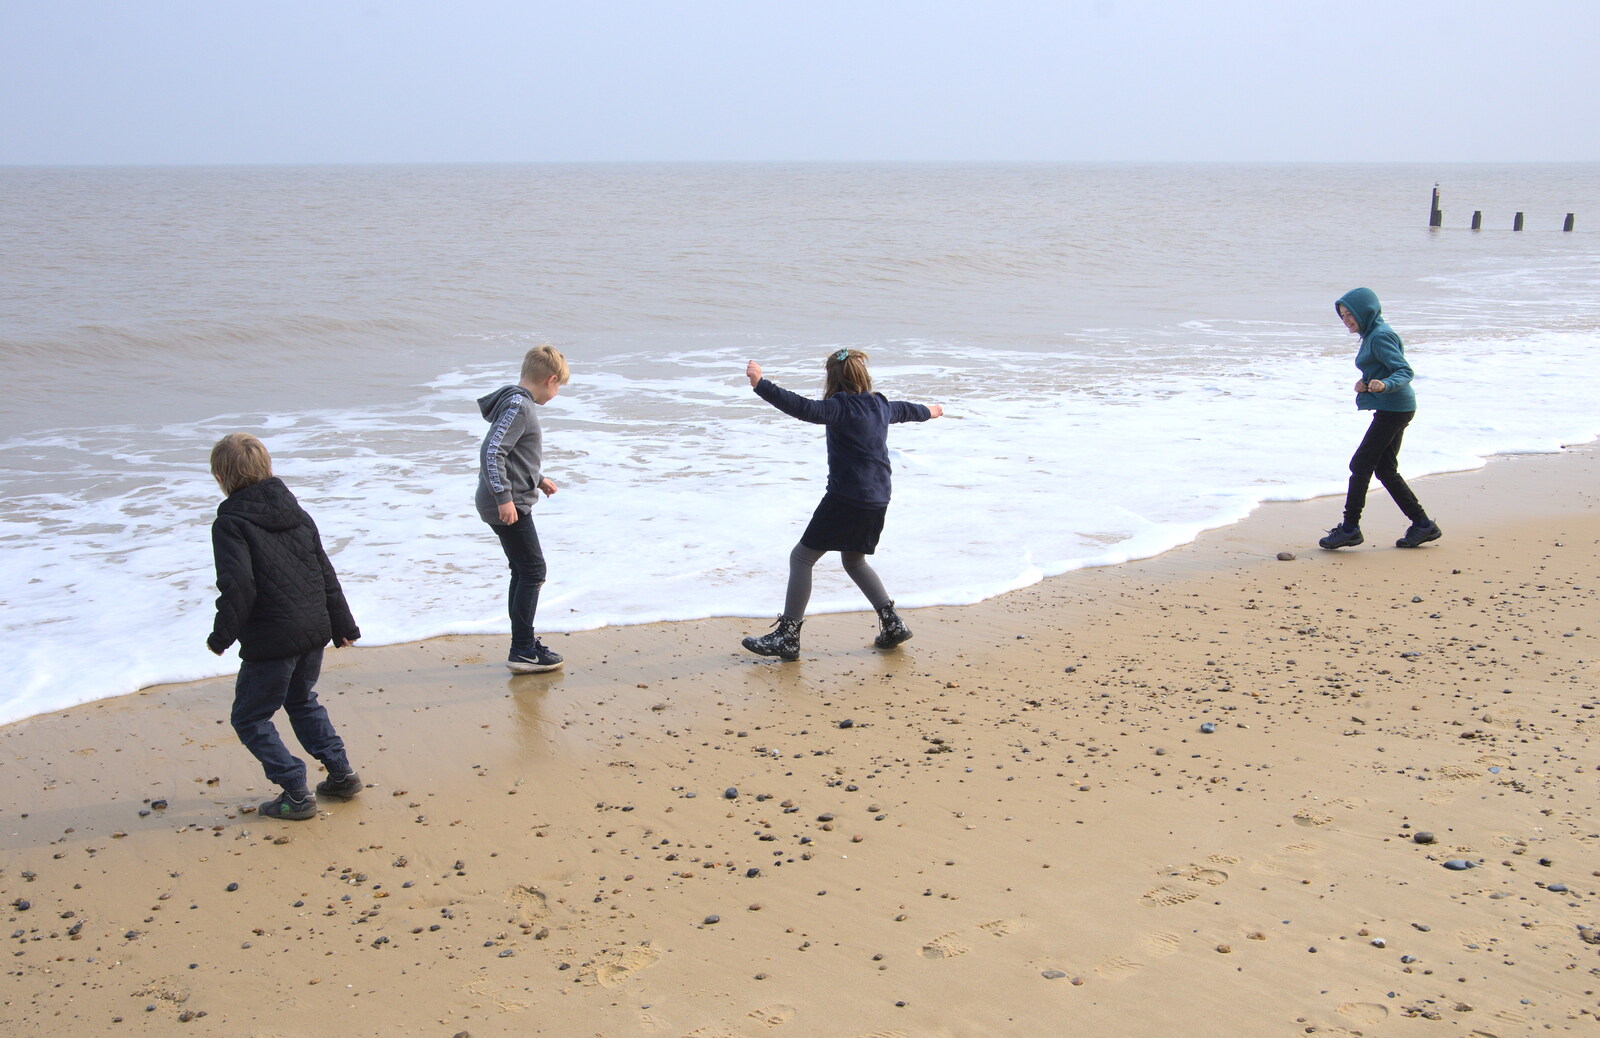 The children mess around on the beach from On The Beach, Southwold, Suffolk - 7th April 2019